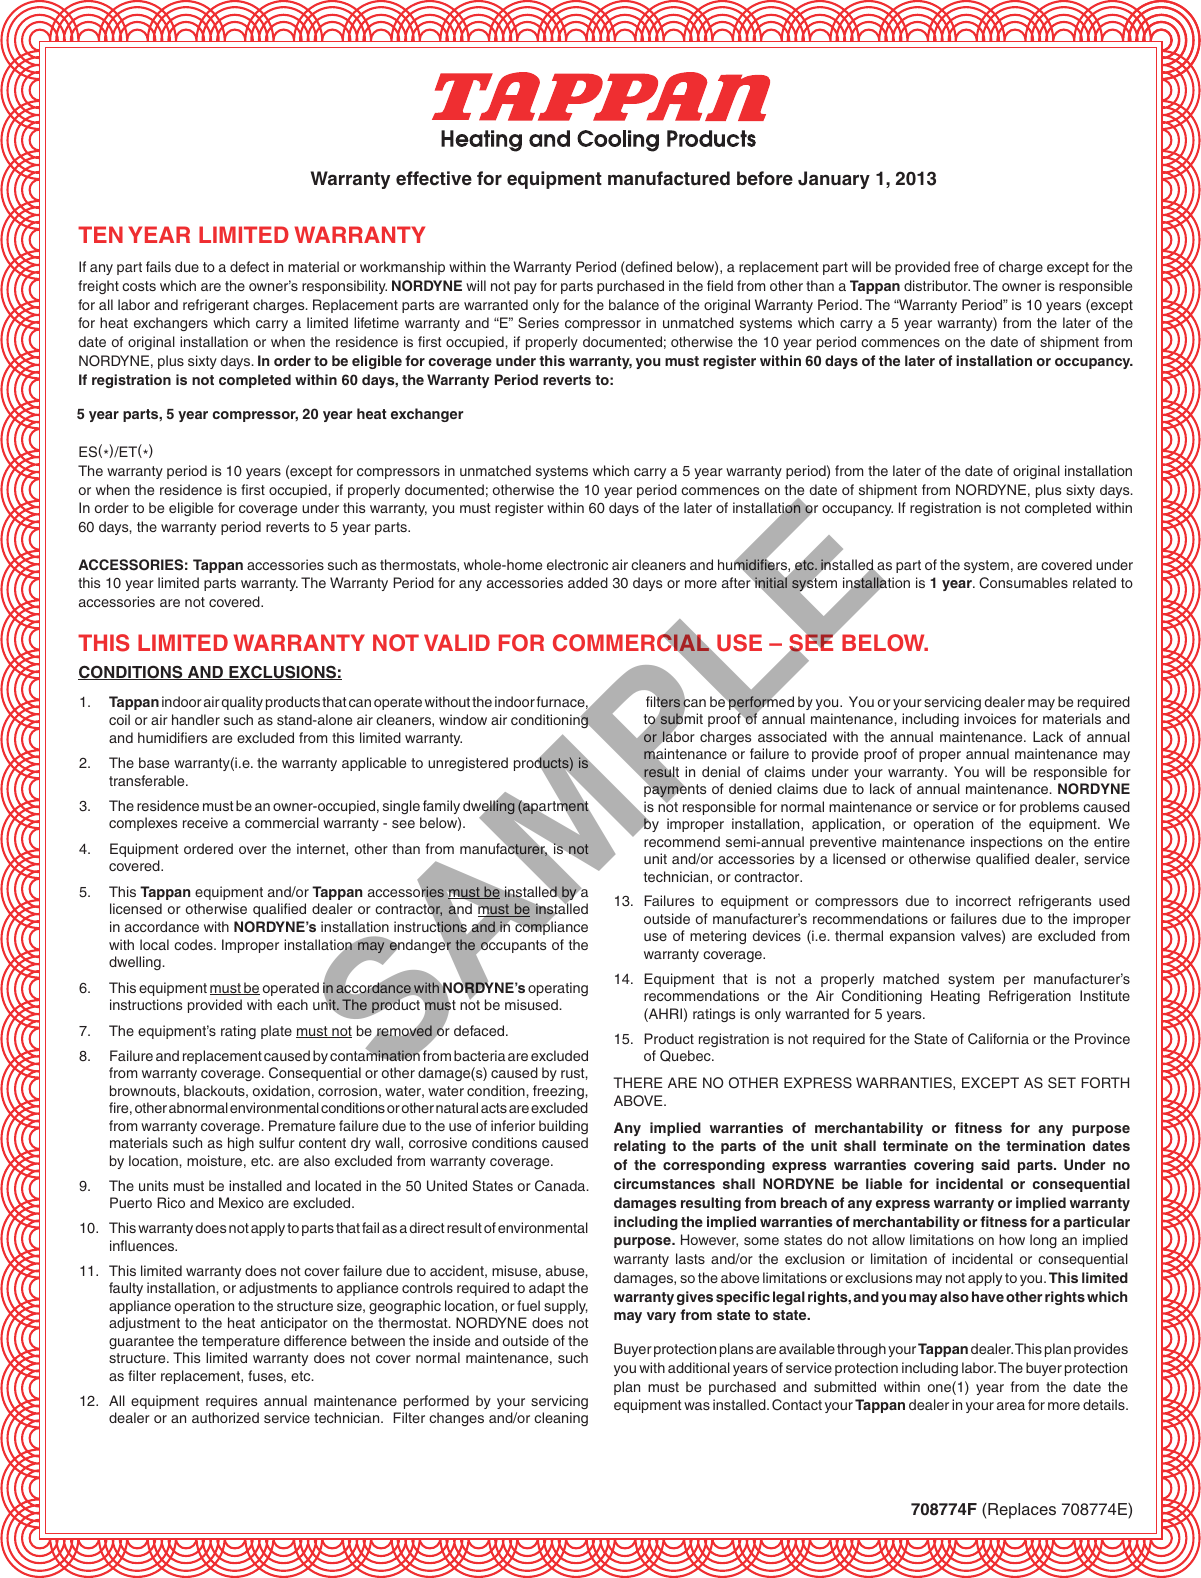 Page 6 of 8 - Tappan Limited Warranty